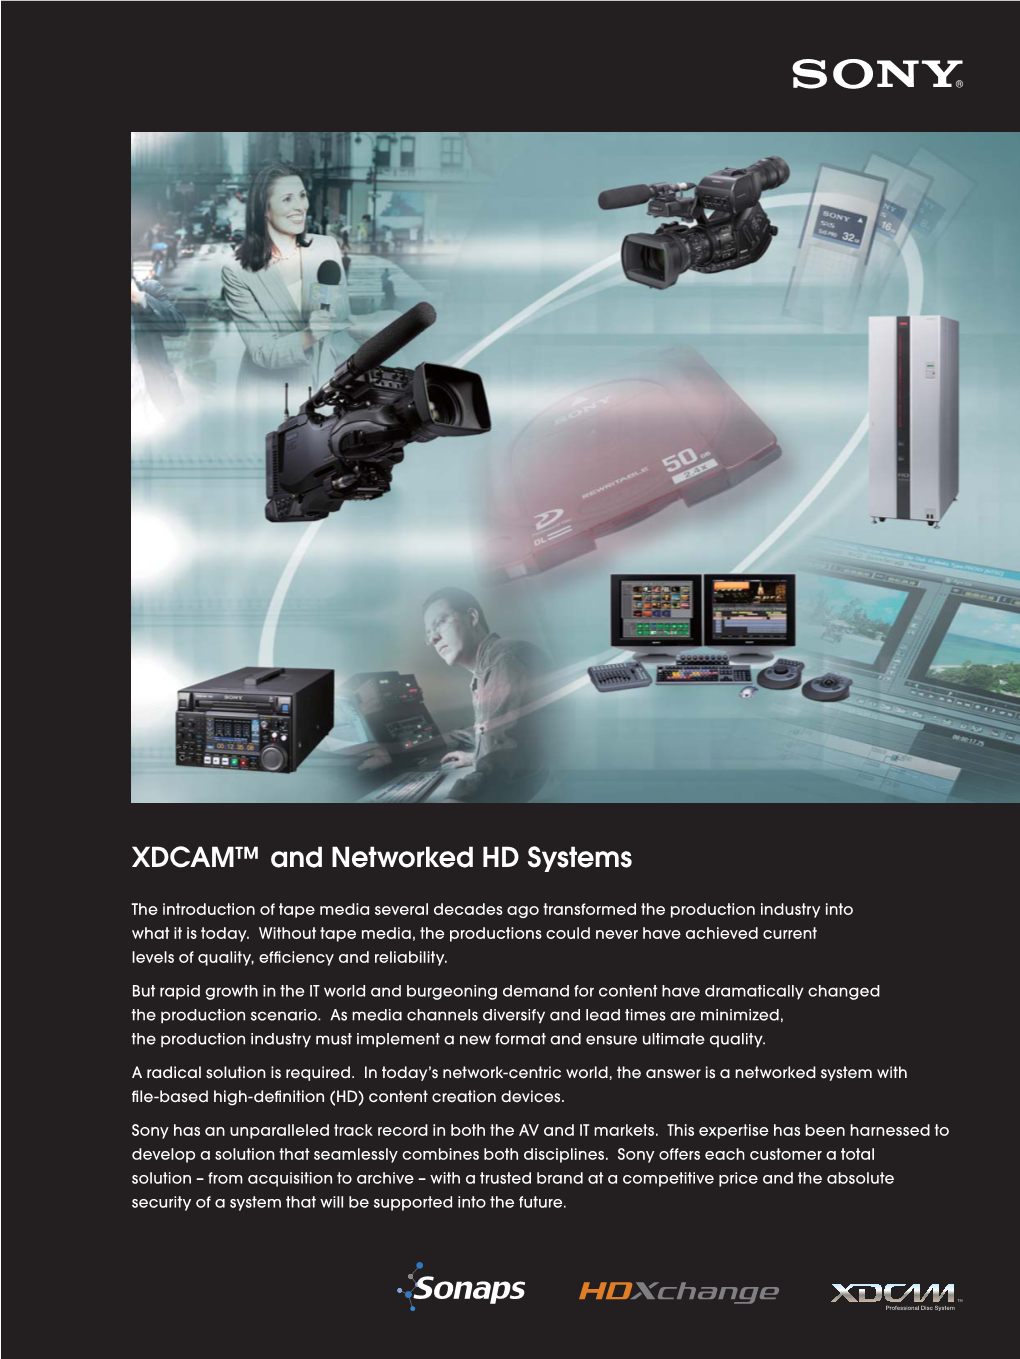 XDCAM™ and Networked HD Systems